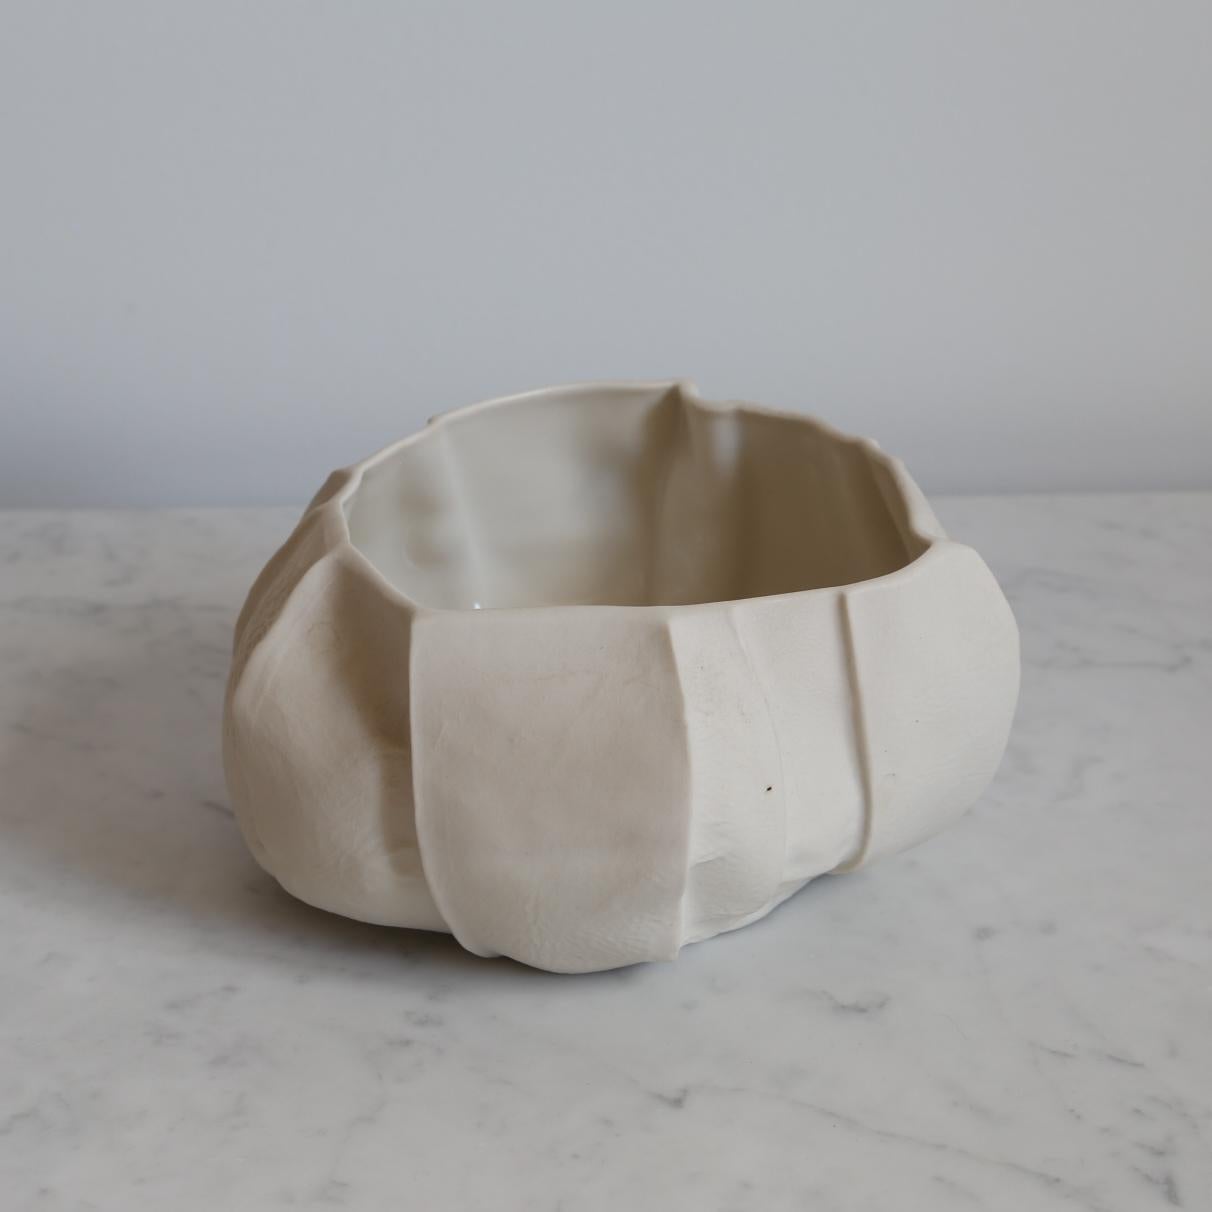 One of a Kind Kawa Bowl by Luft Tanaka, Ceramic, Porcelain, in Stock (Gegossen)